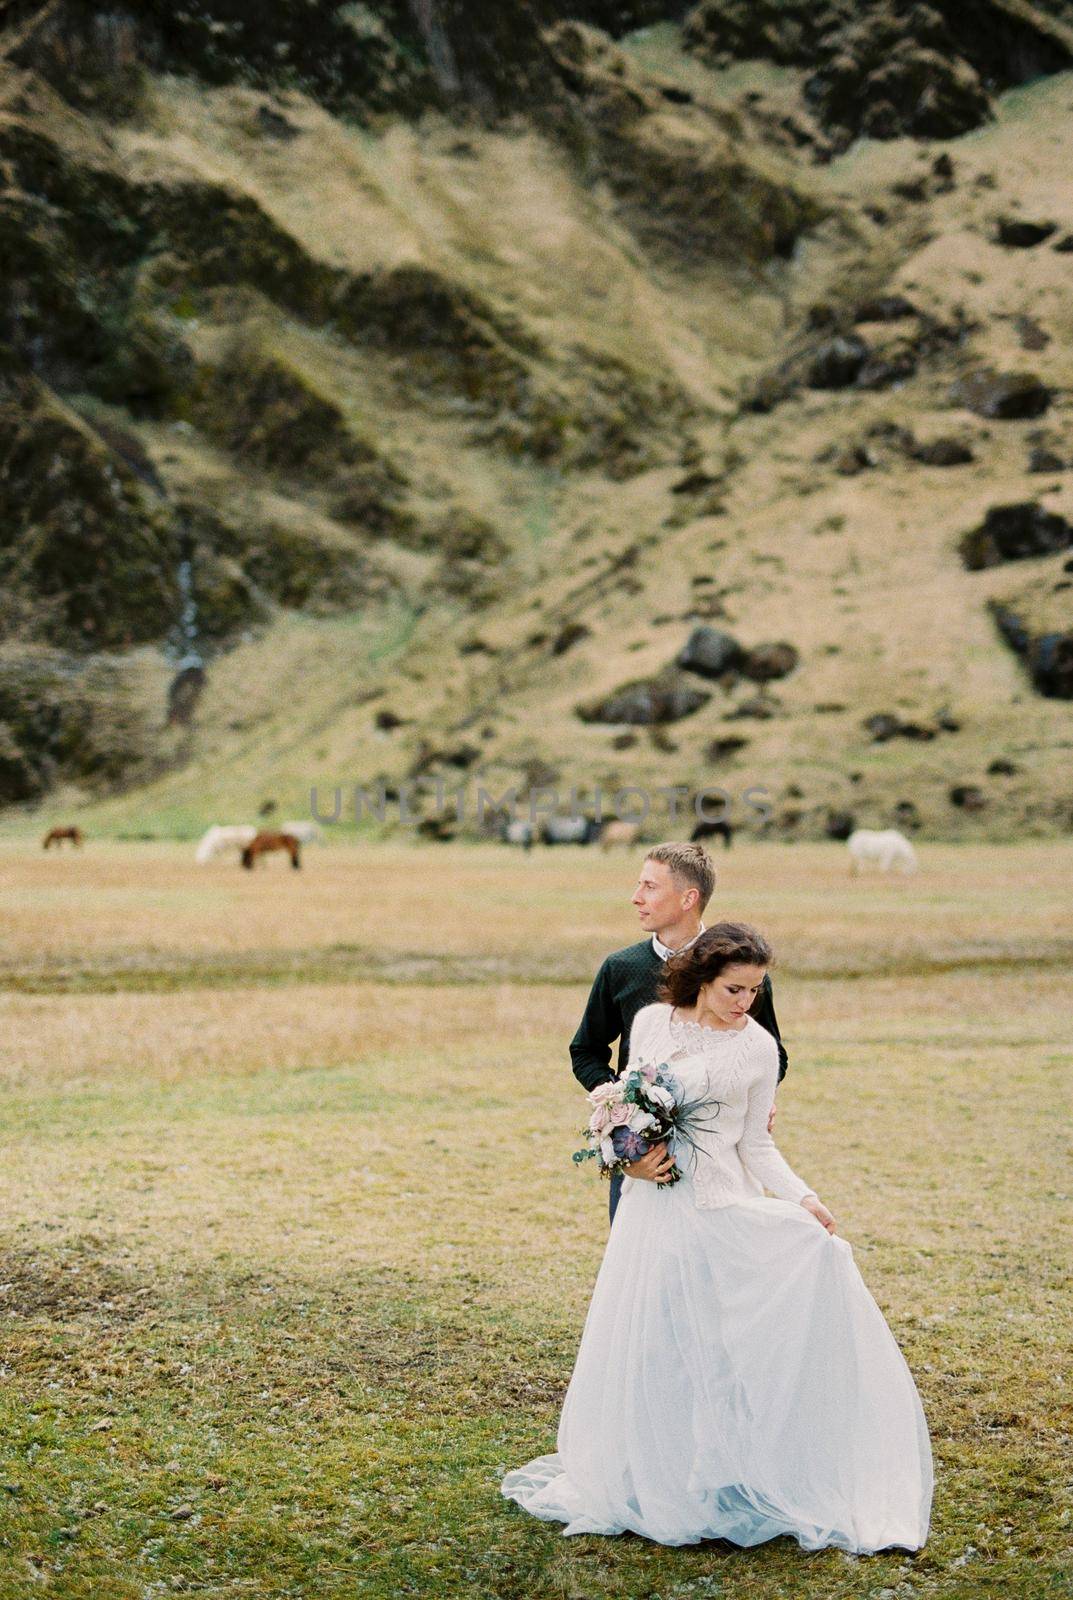 Bride with a bouquet stands next to her groom in a mountain valley. Iceland by Nadtochiy